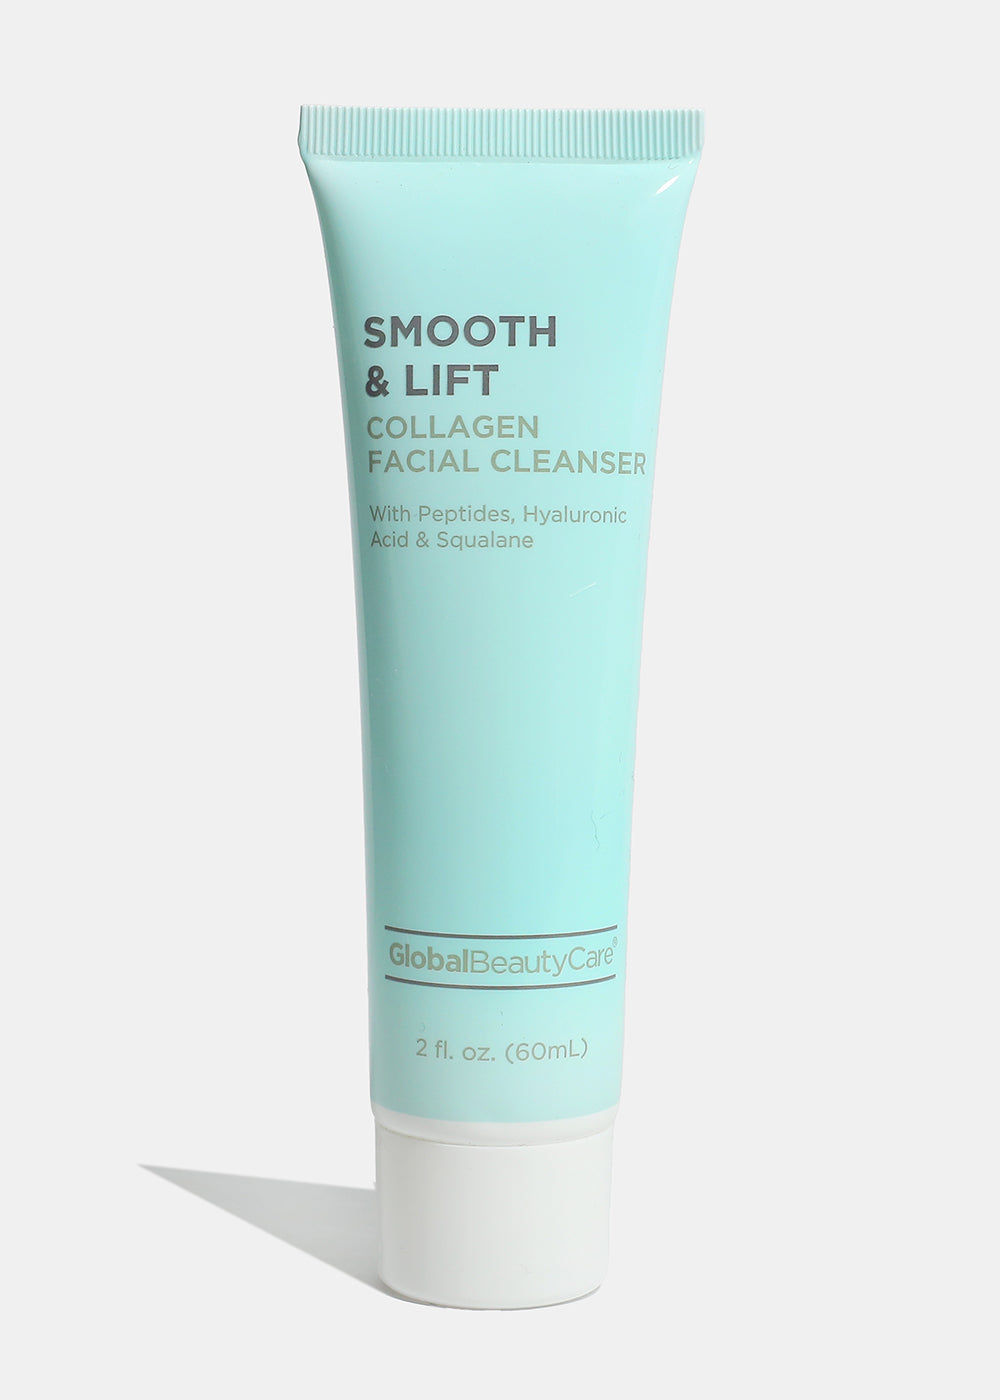 Smooth & Lift Facial Cleanser